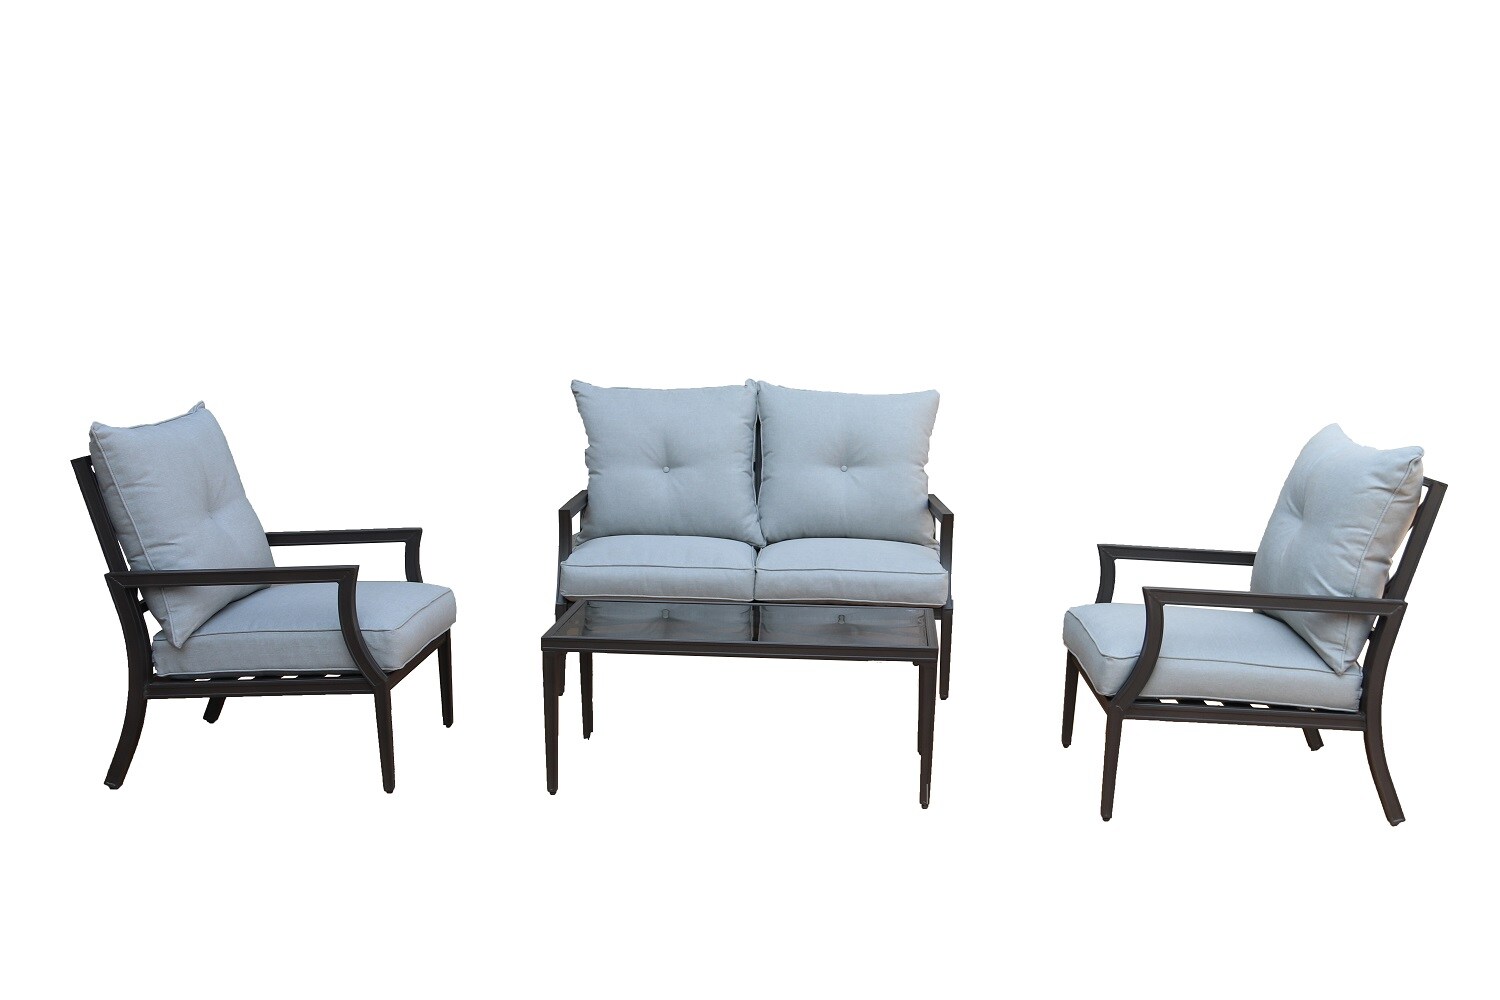 Moda Furnishings Modern Muse 4pcs Alum Sofa Set 4-Piece Metal Patio Conversation Set with Cushions in the Patio Conversation Sets department at Lowes.com